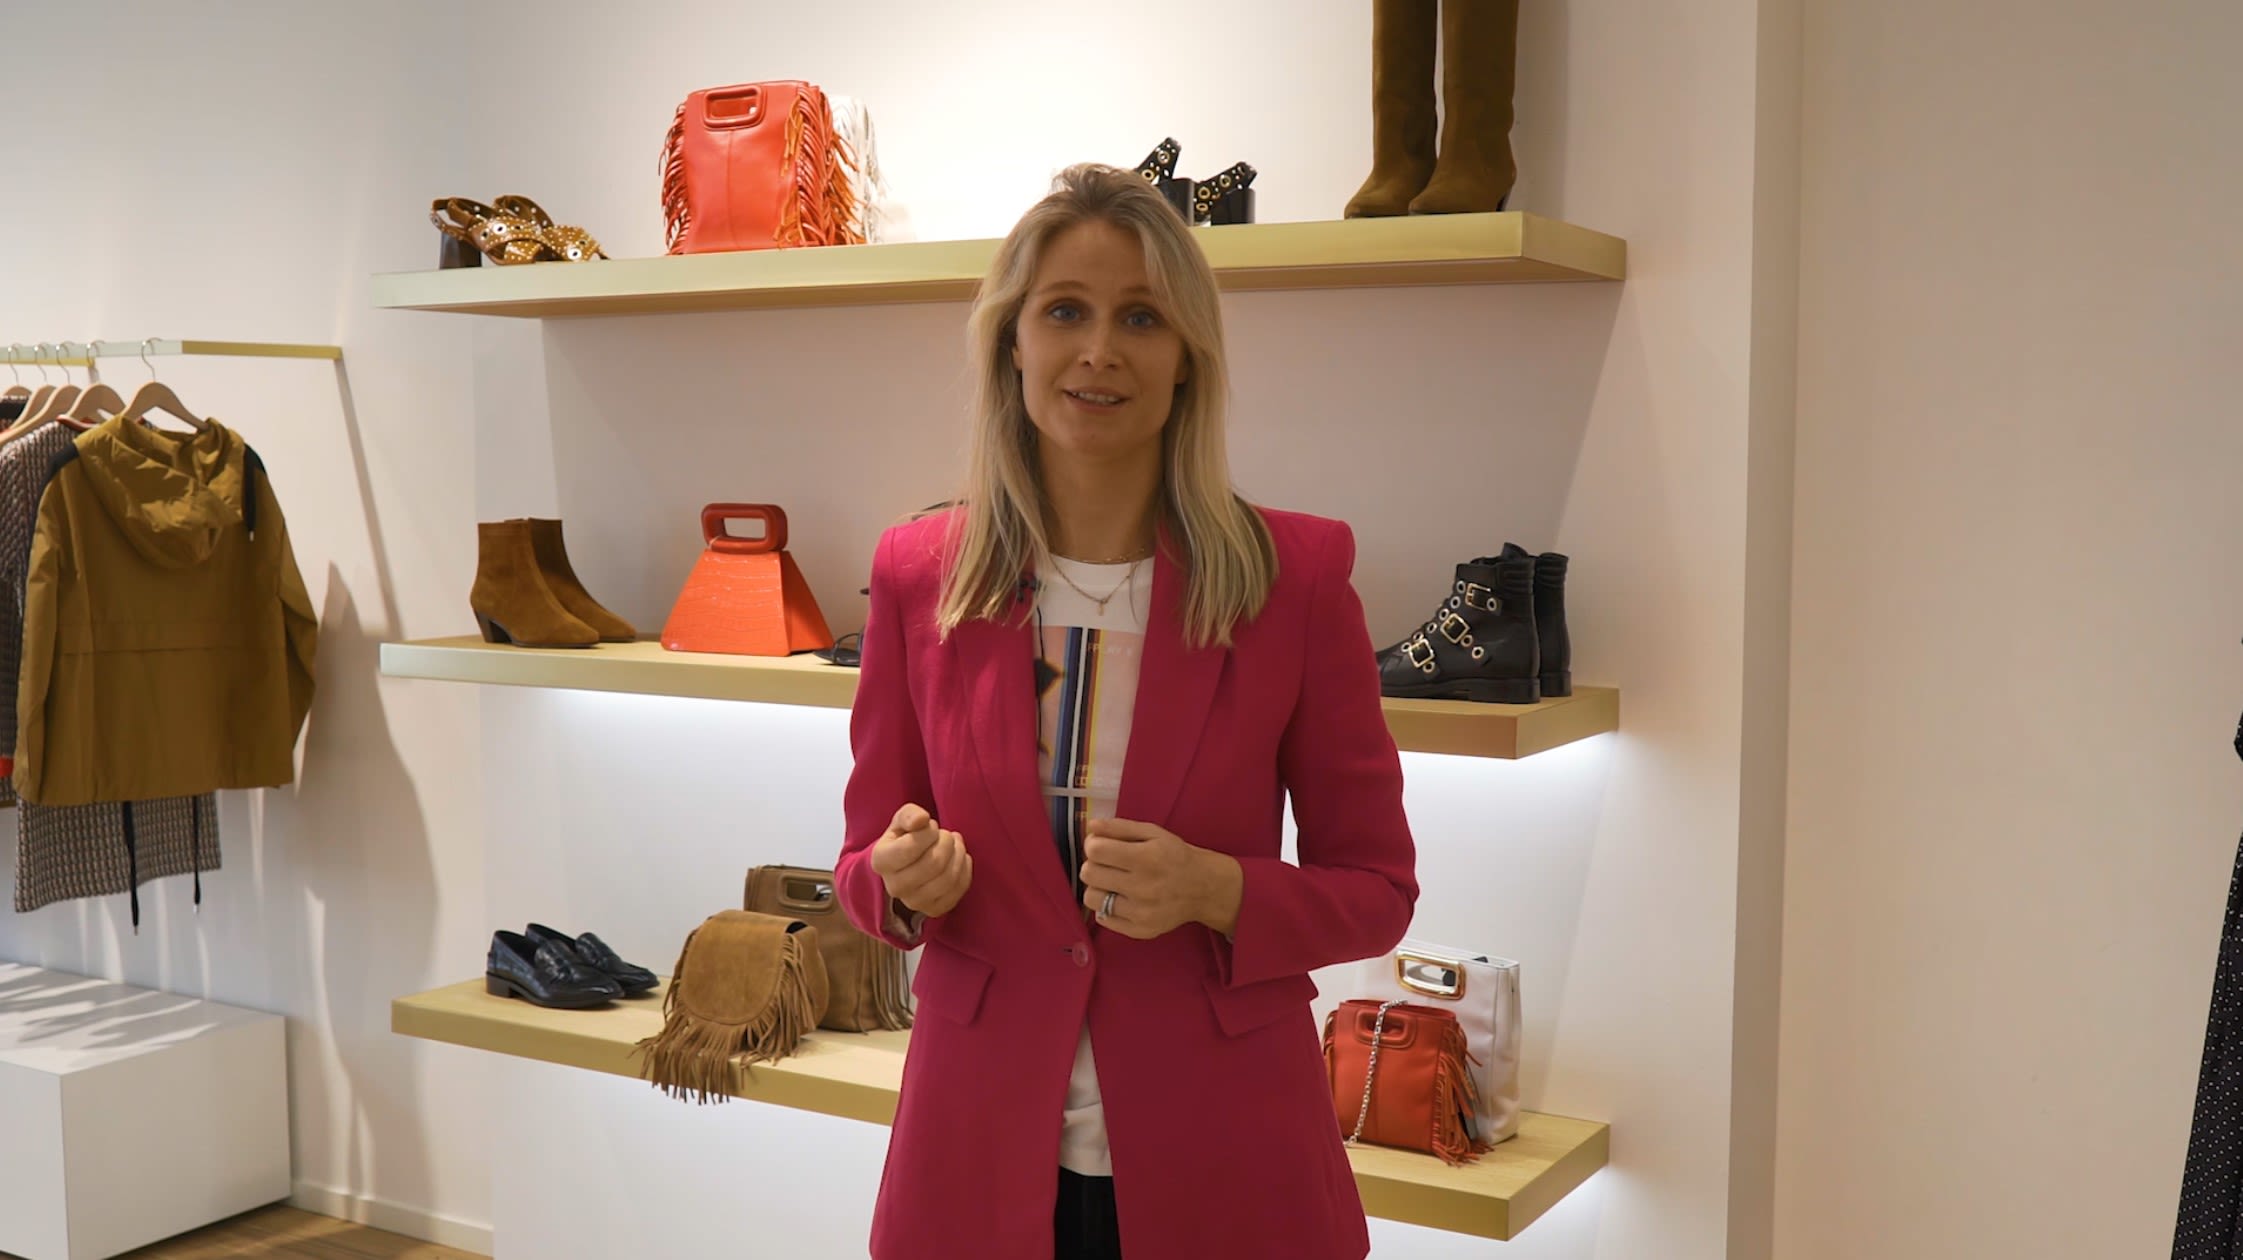 One-to-one virtual shopping with the Maje boutique at Kildare Village